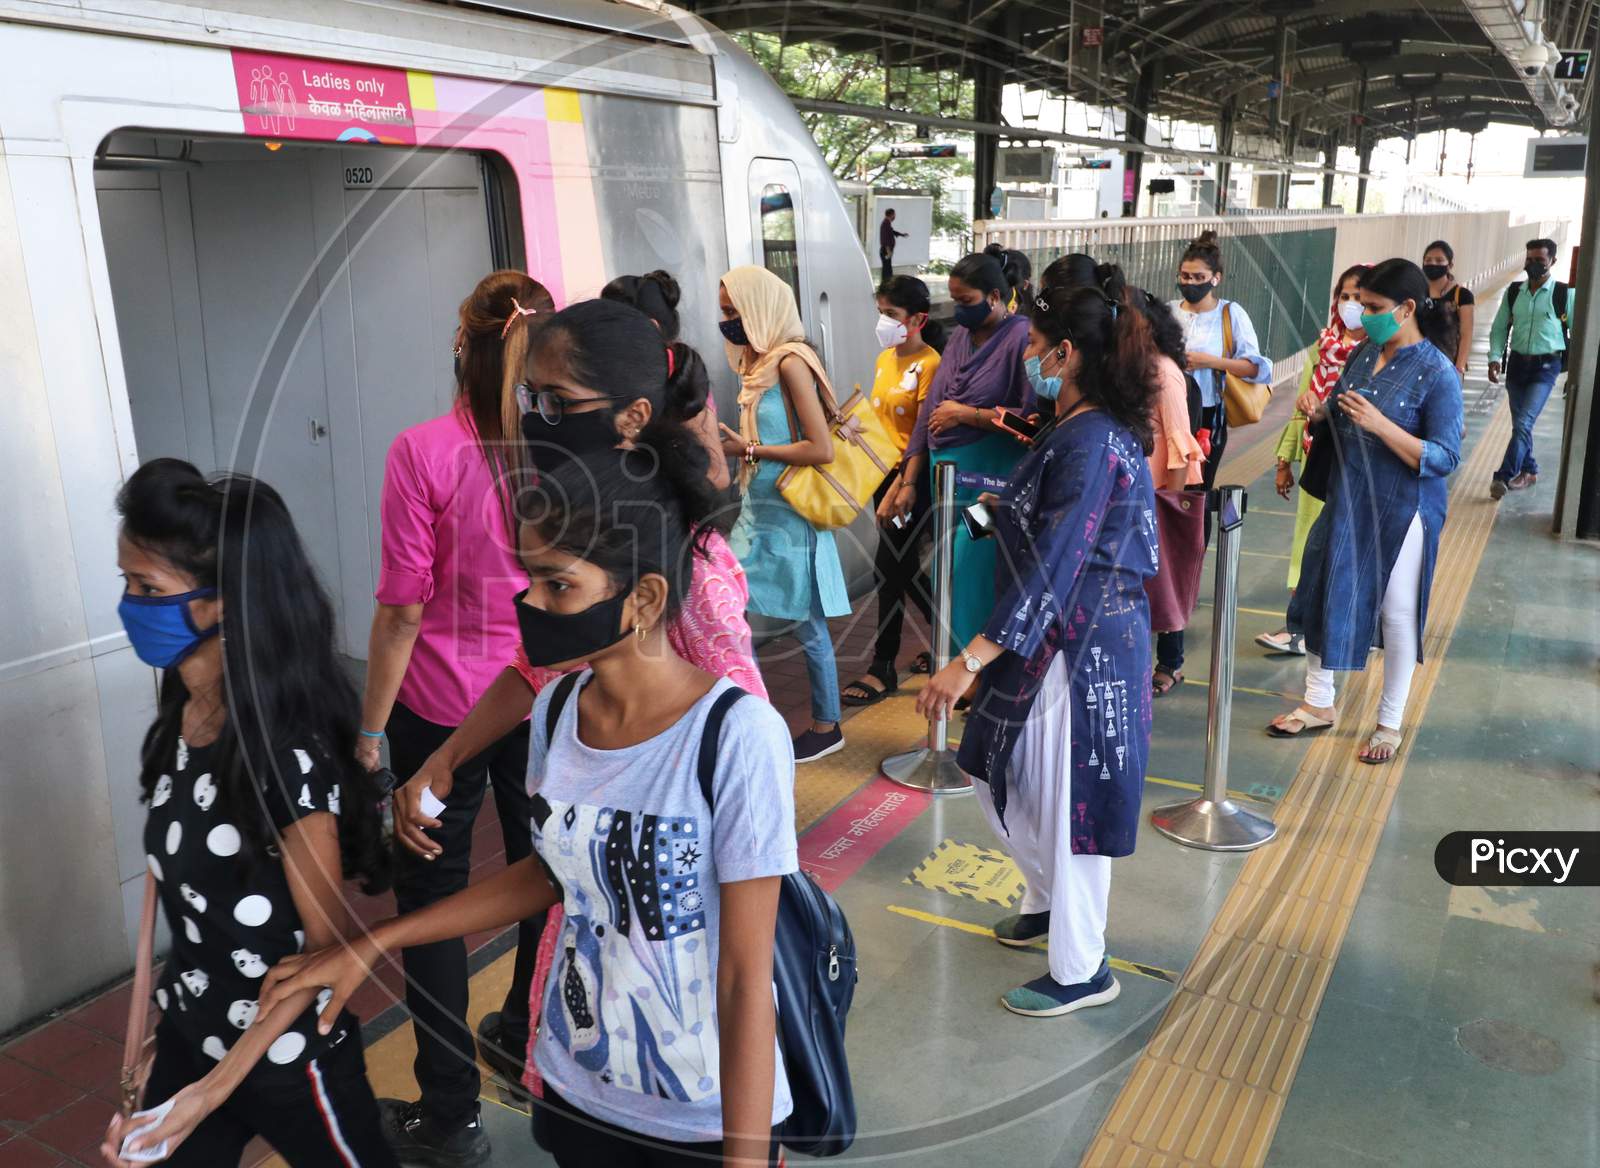 Commuters wearing protective face masks board a metro after authorities resumed the metro services, amidst the coronavirus disease (COVID-19) outbreak, in Mumbai, India, October 28, 2020.